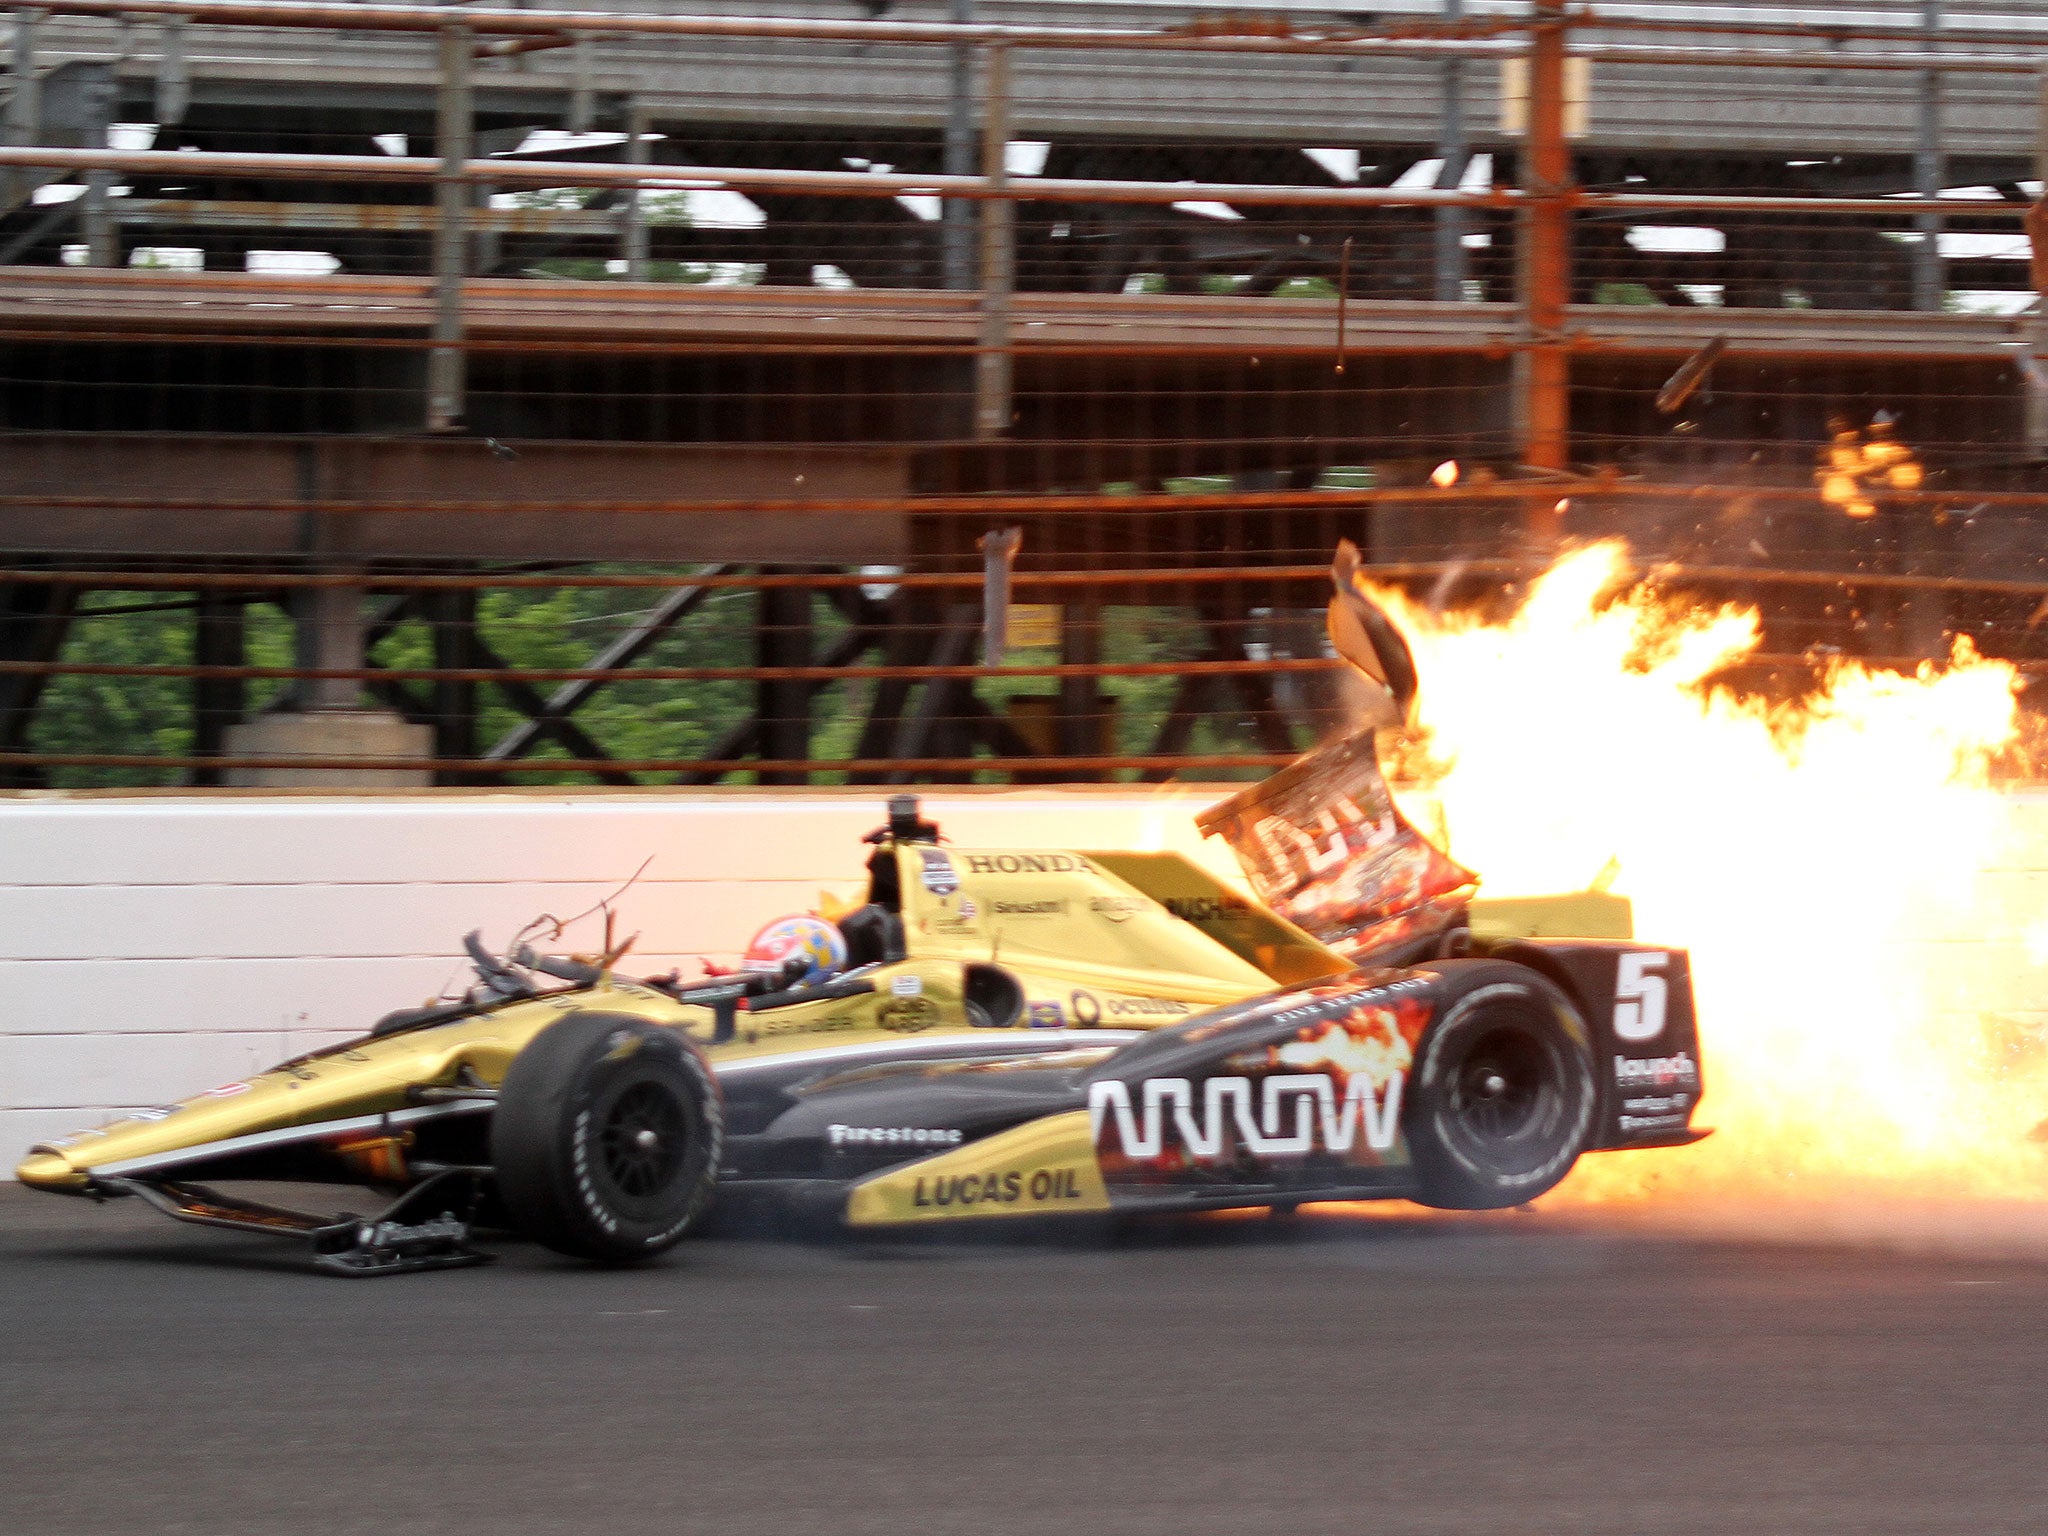 James Hinchcliffe suffered a scary accident in practice for the Indy 500